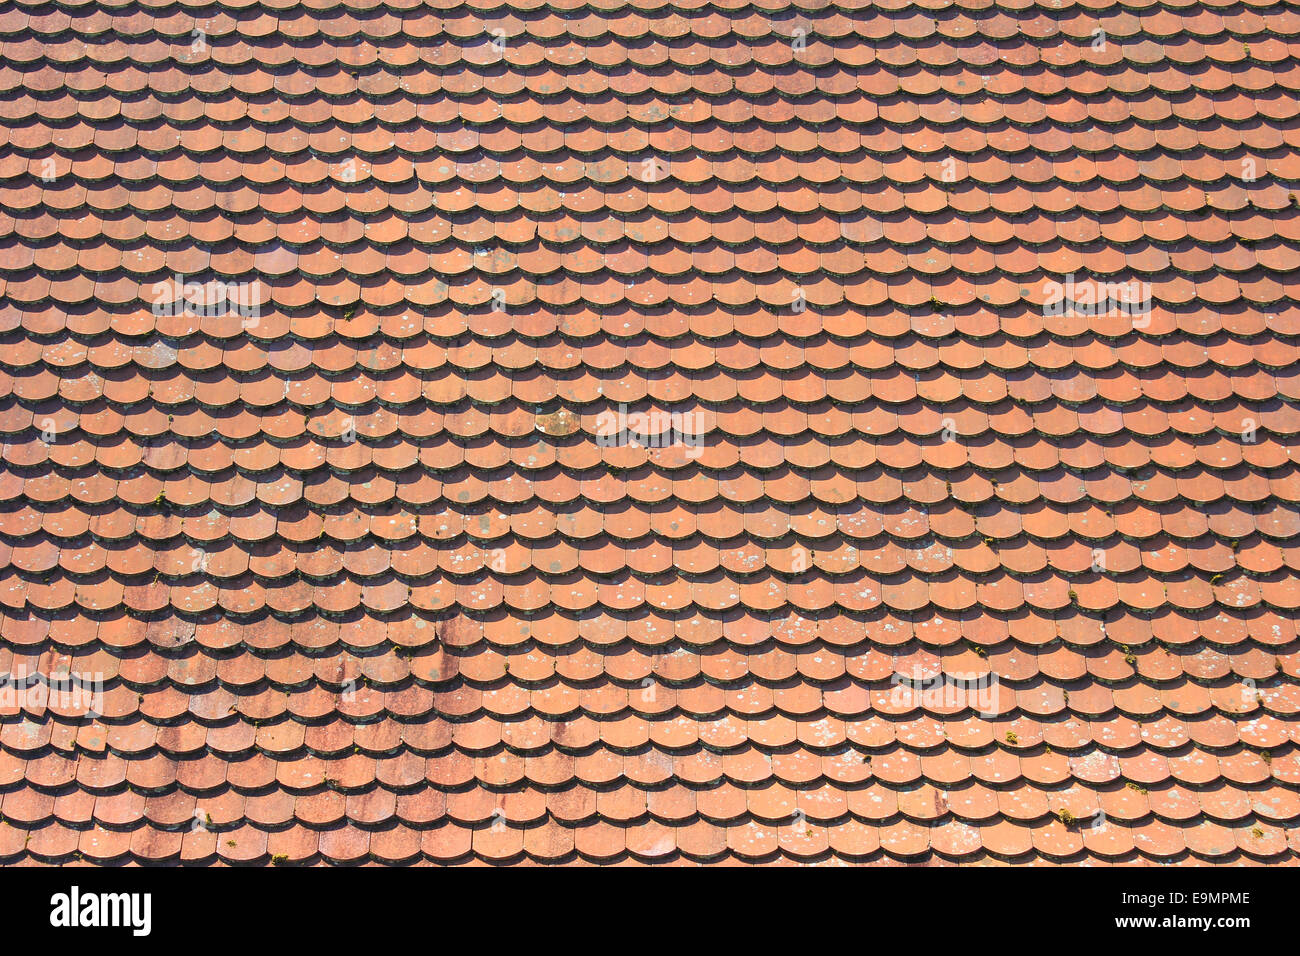 Roof with red tiles Stock Photo